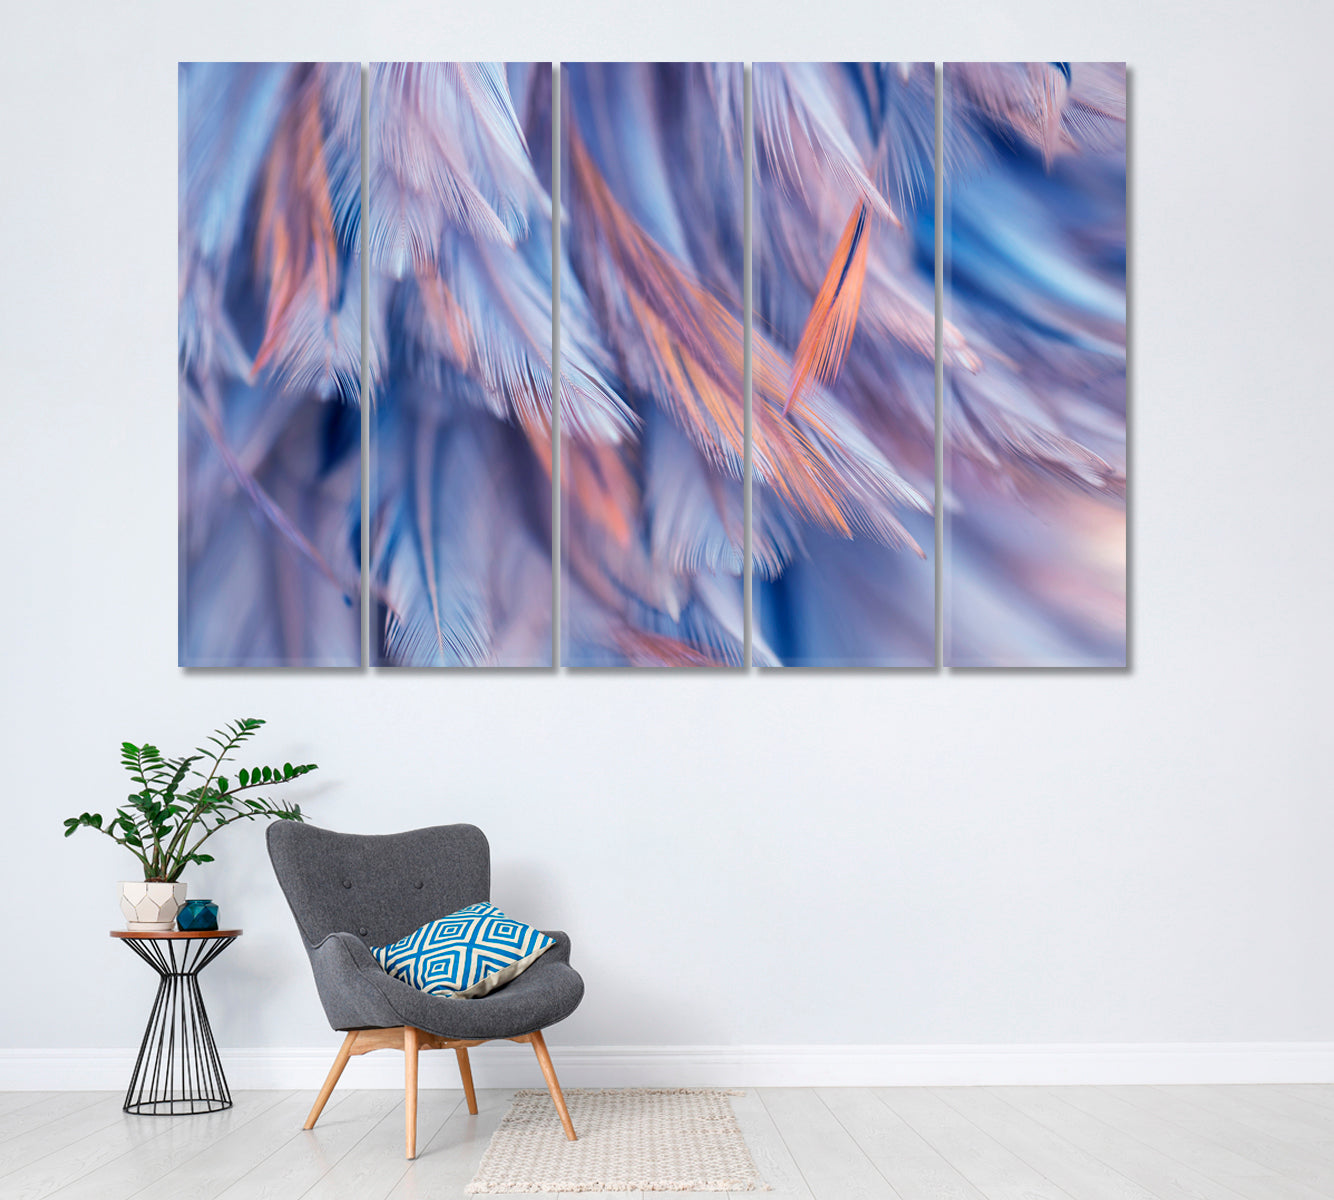 Feathers Canvas Print ArtLexy 5 Panels 36"x24" inches 